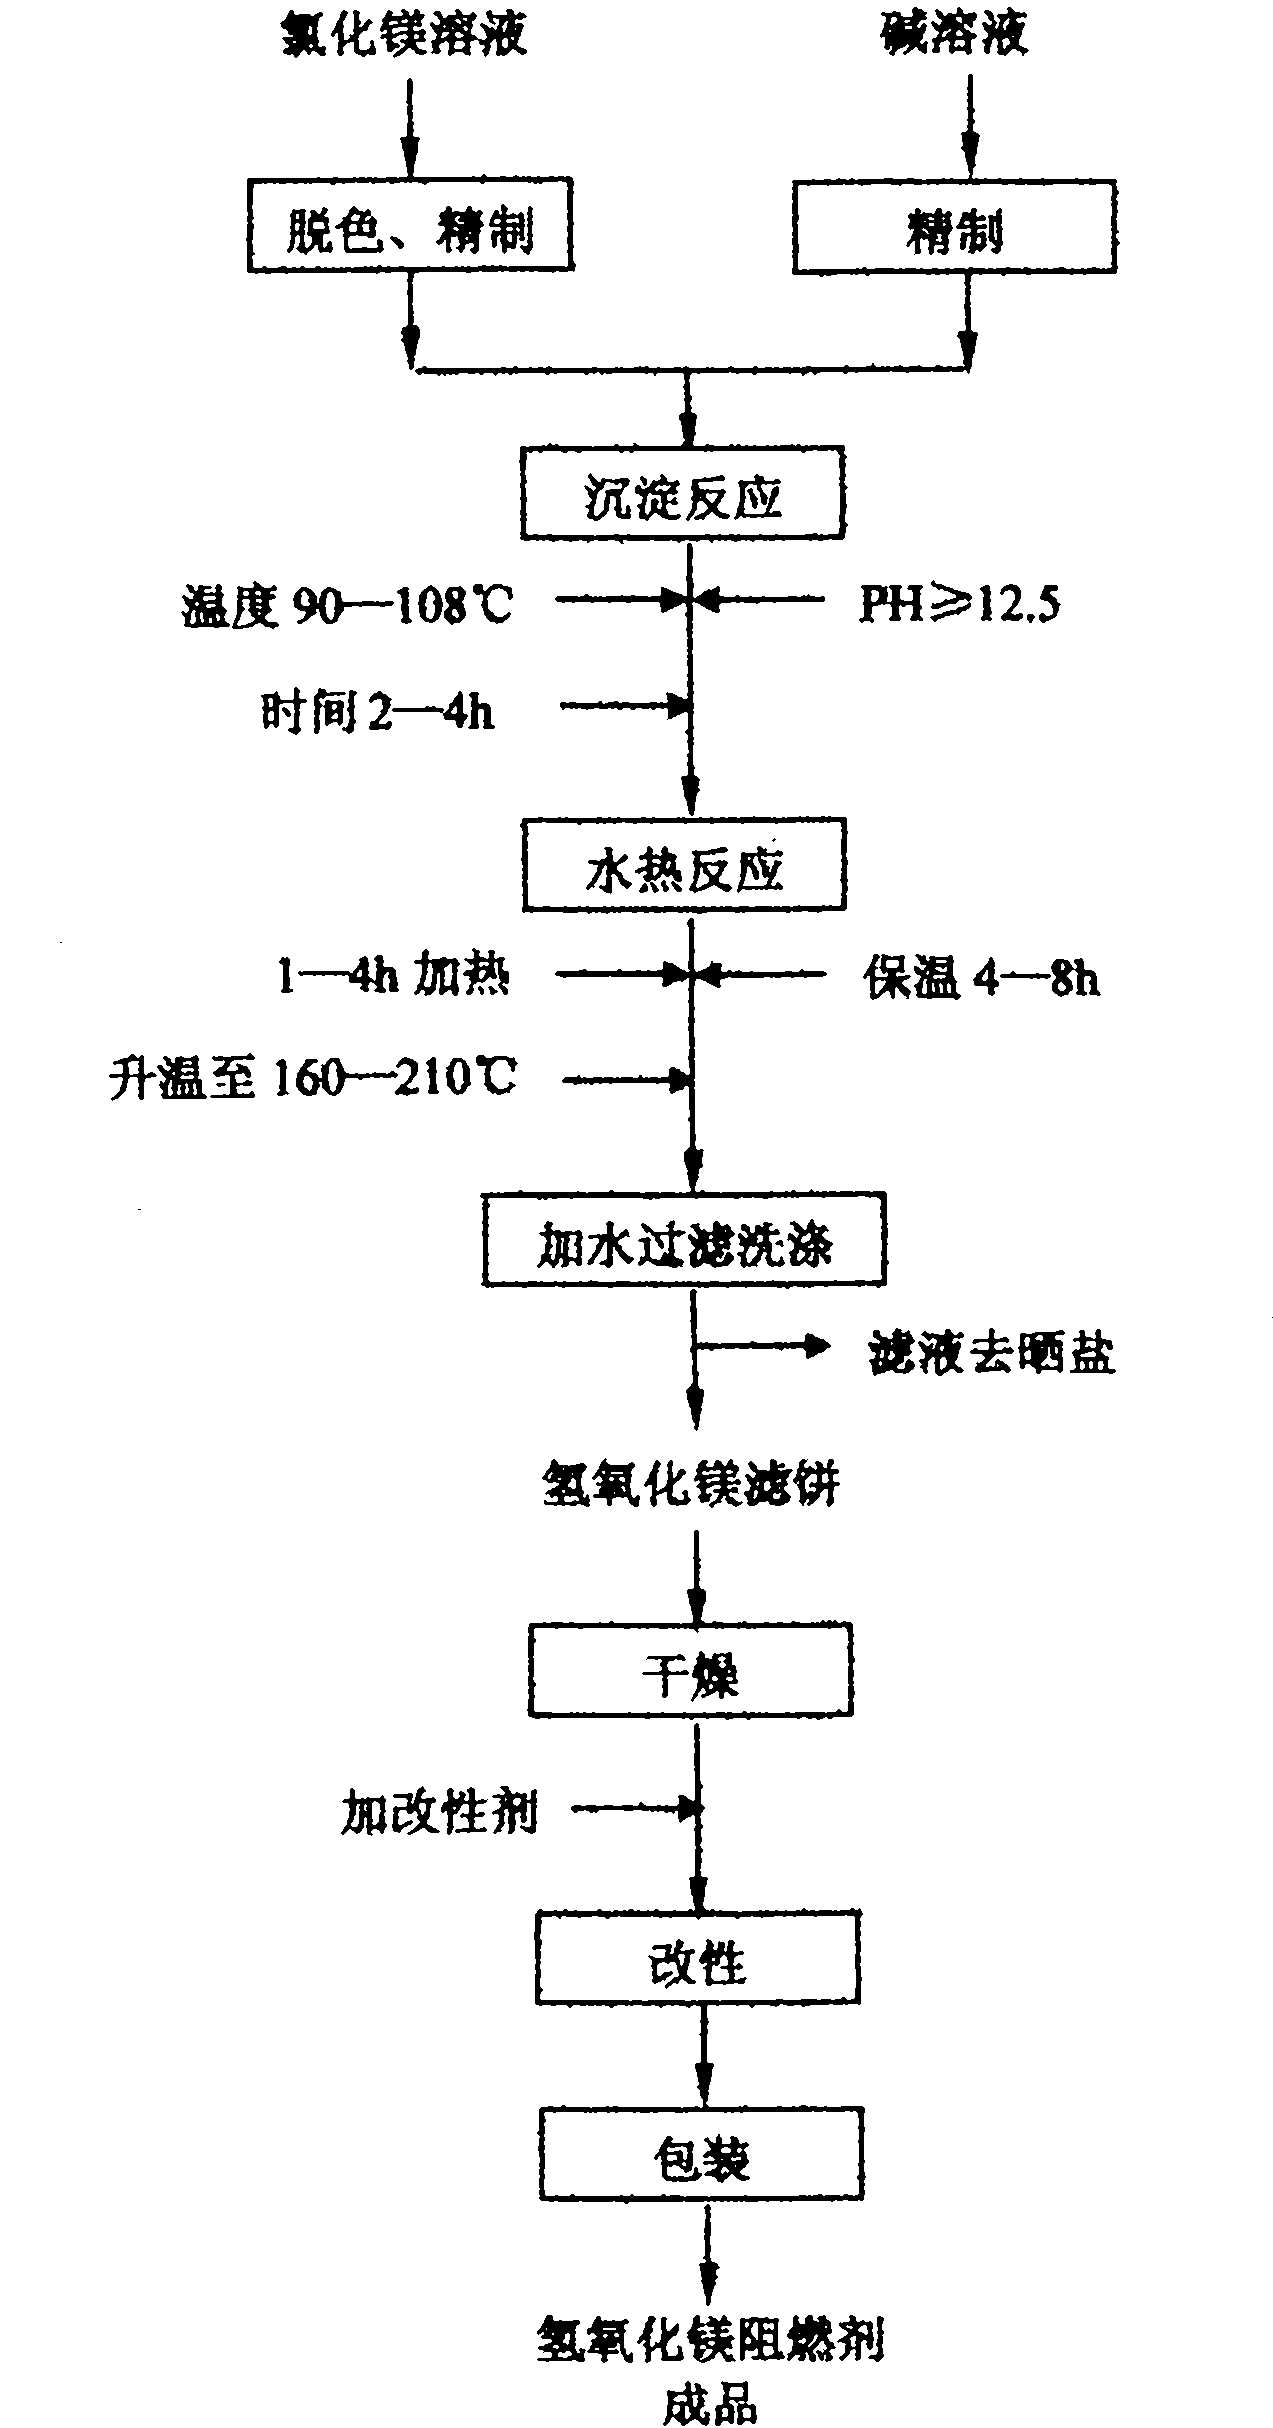 Process for preparing super-thin high-purity magnesium hydroxide fire retardant by supergravity-hydrothermal method